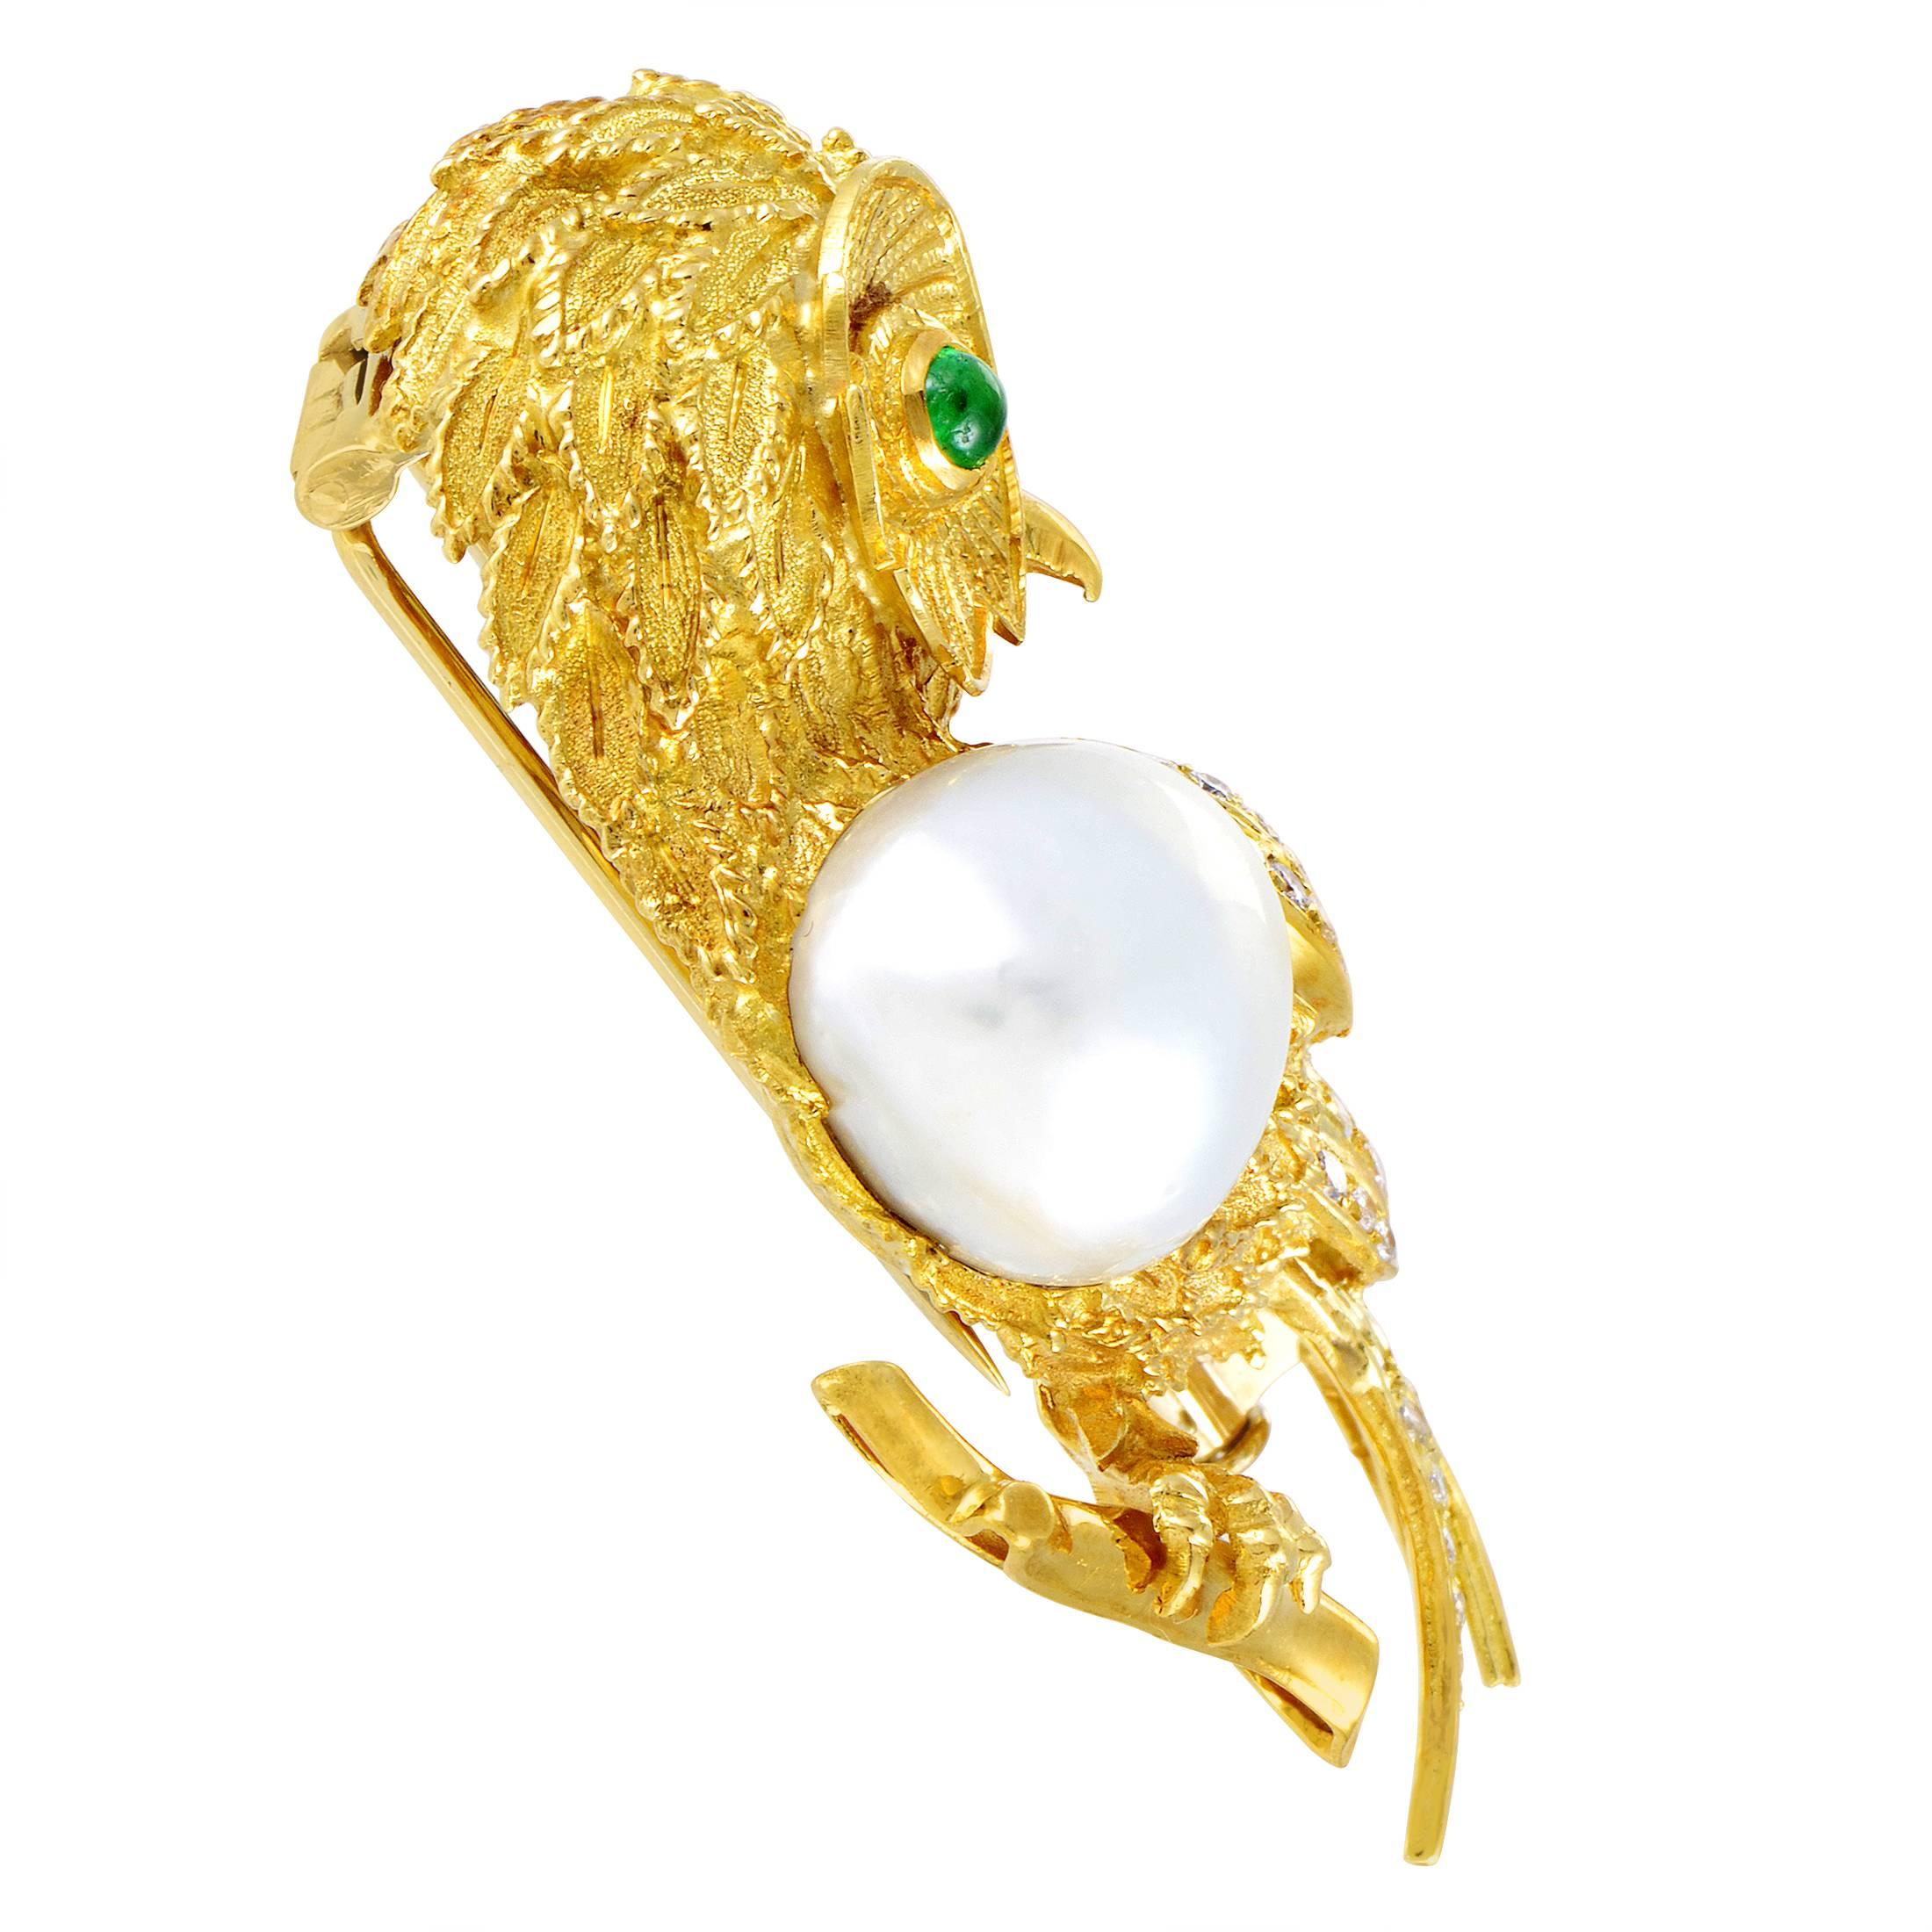 Boasting an angelic mabe pearl at the heart of the design, this majestic brooch in the shape of an adorable owl is made of exquisitely crafted and luxuriously radiant 18K yellow gold, with 0.85ct of glistening diamonds scattered across its wings and